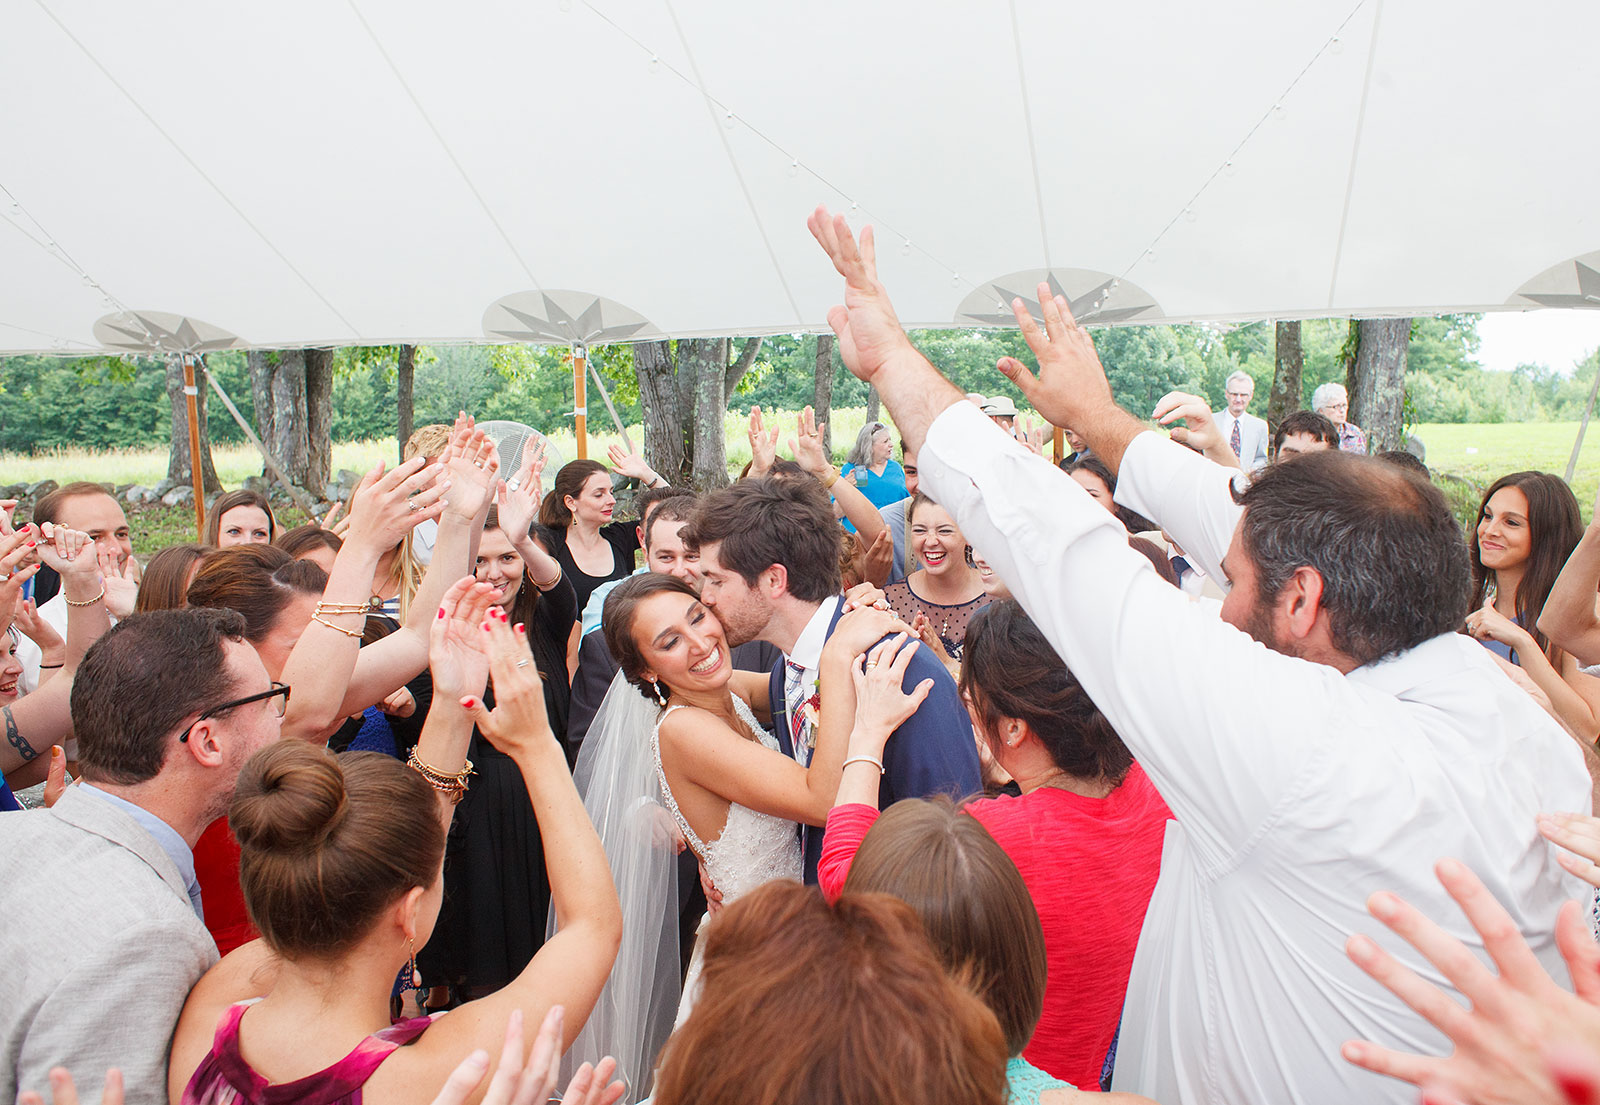 Surrounded by friends and family, a bride and groom embrace on the dance floor of their wedding reception. 